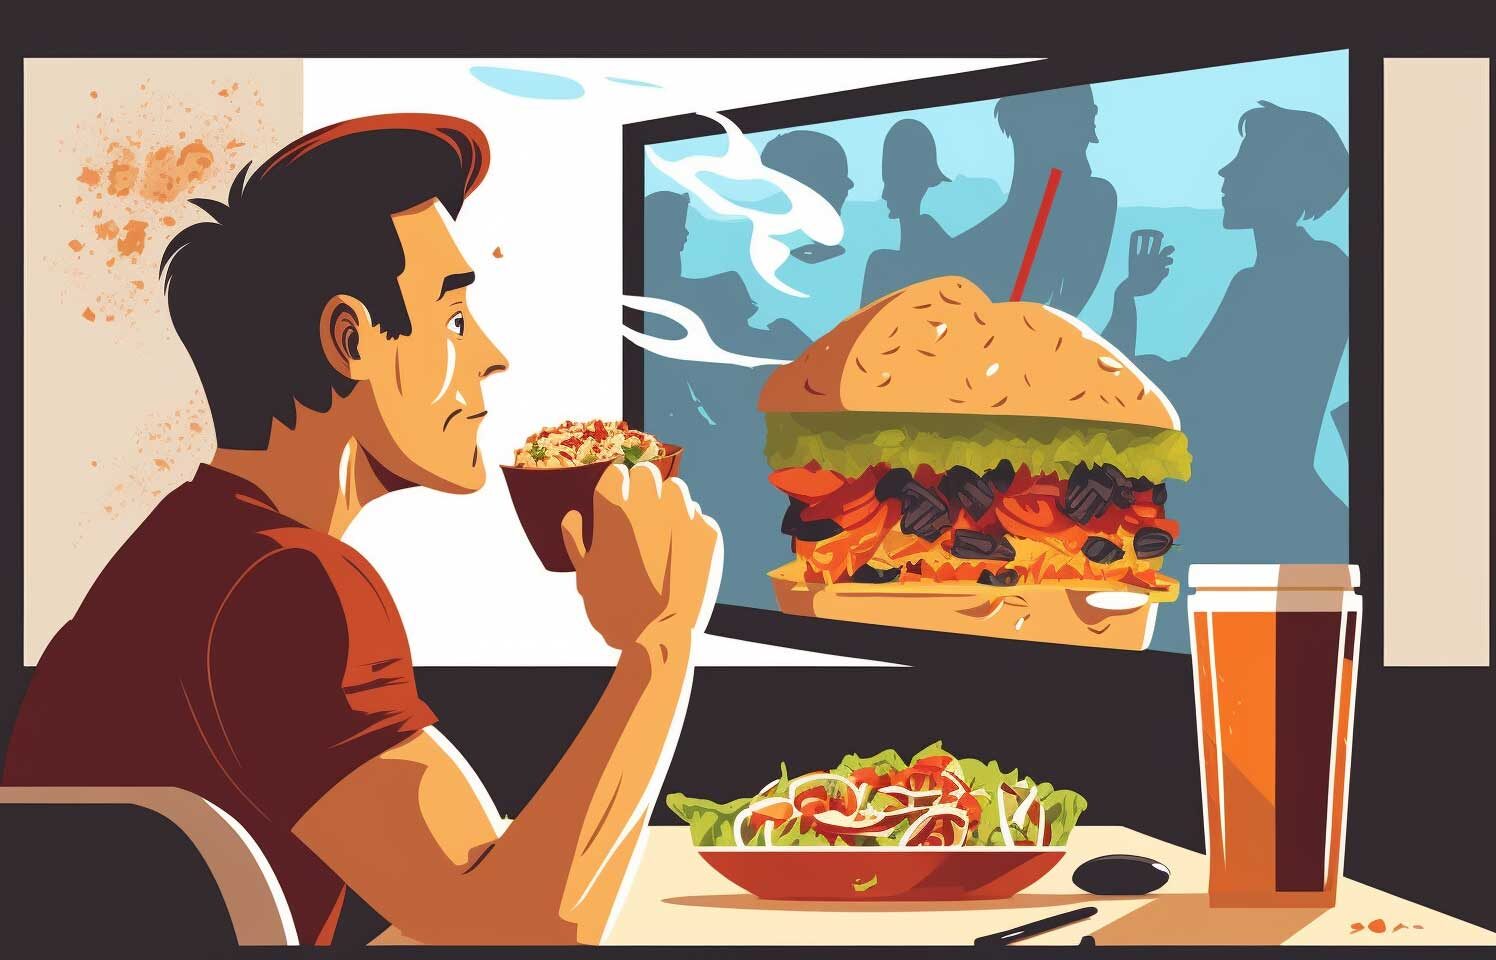 Concept illustration of a man eating and watching fast food commercials. Image credit: Nicole Smith, made with Midjourney